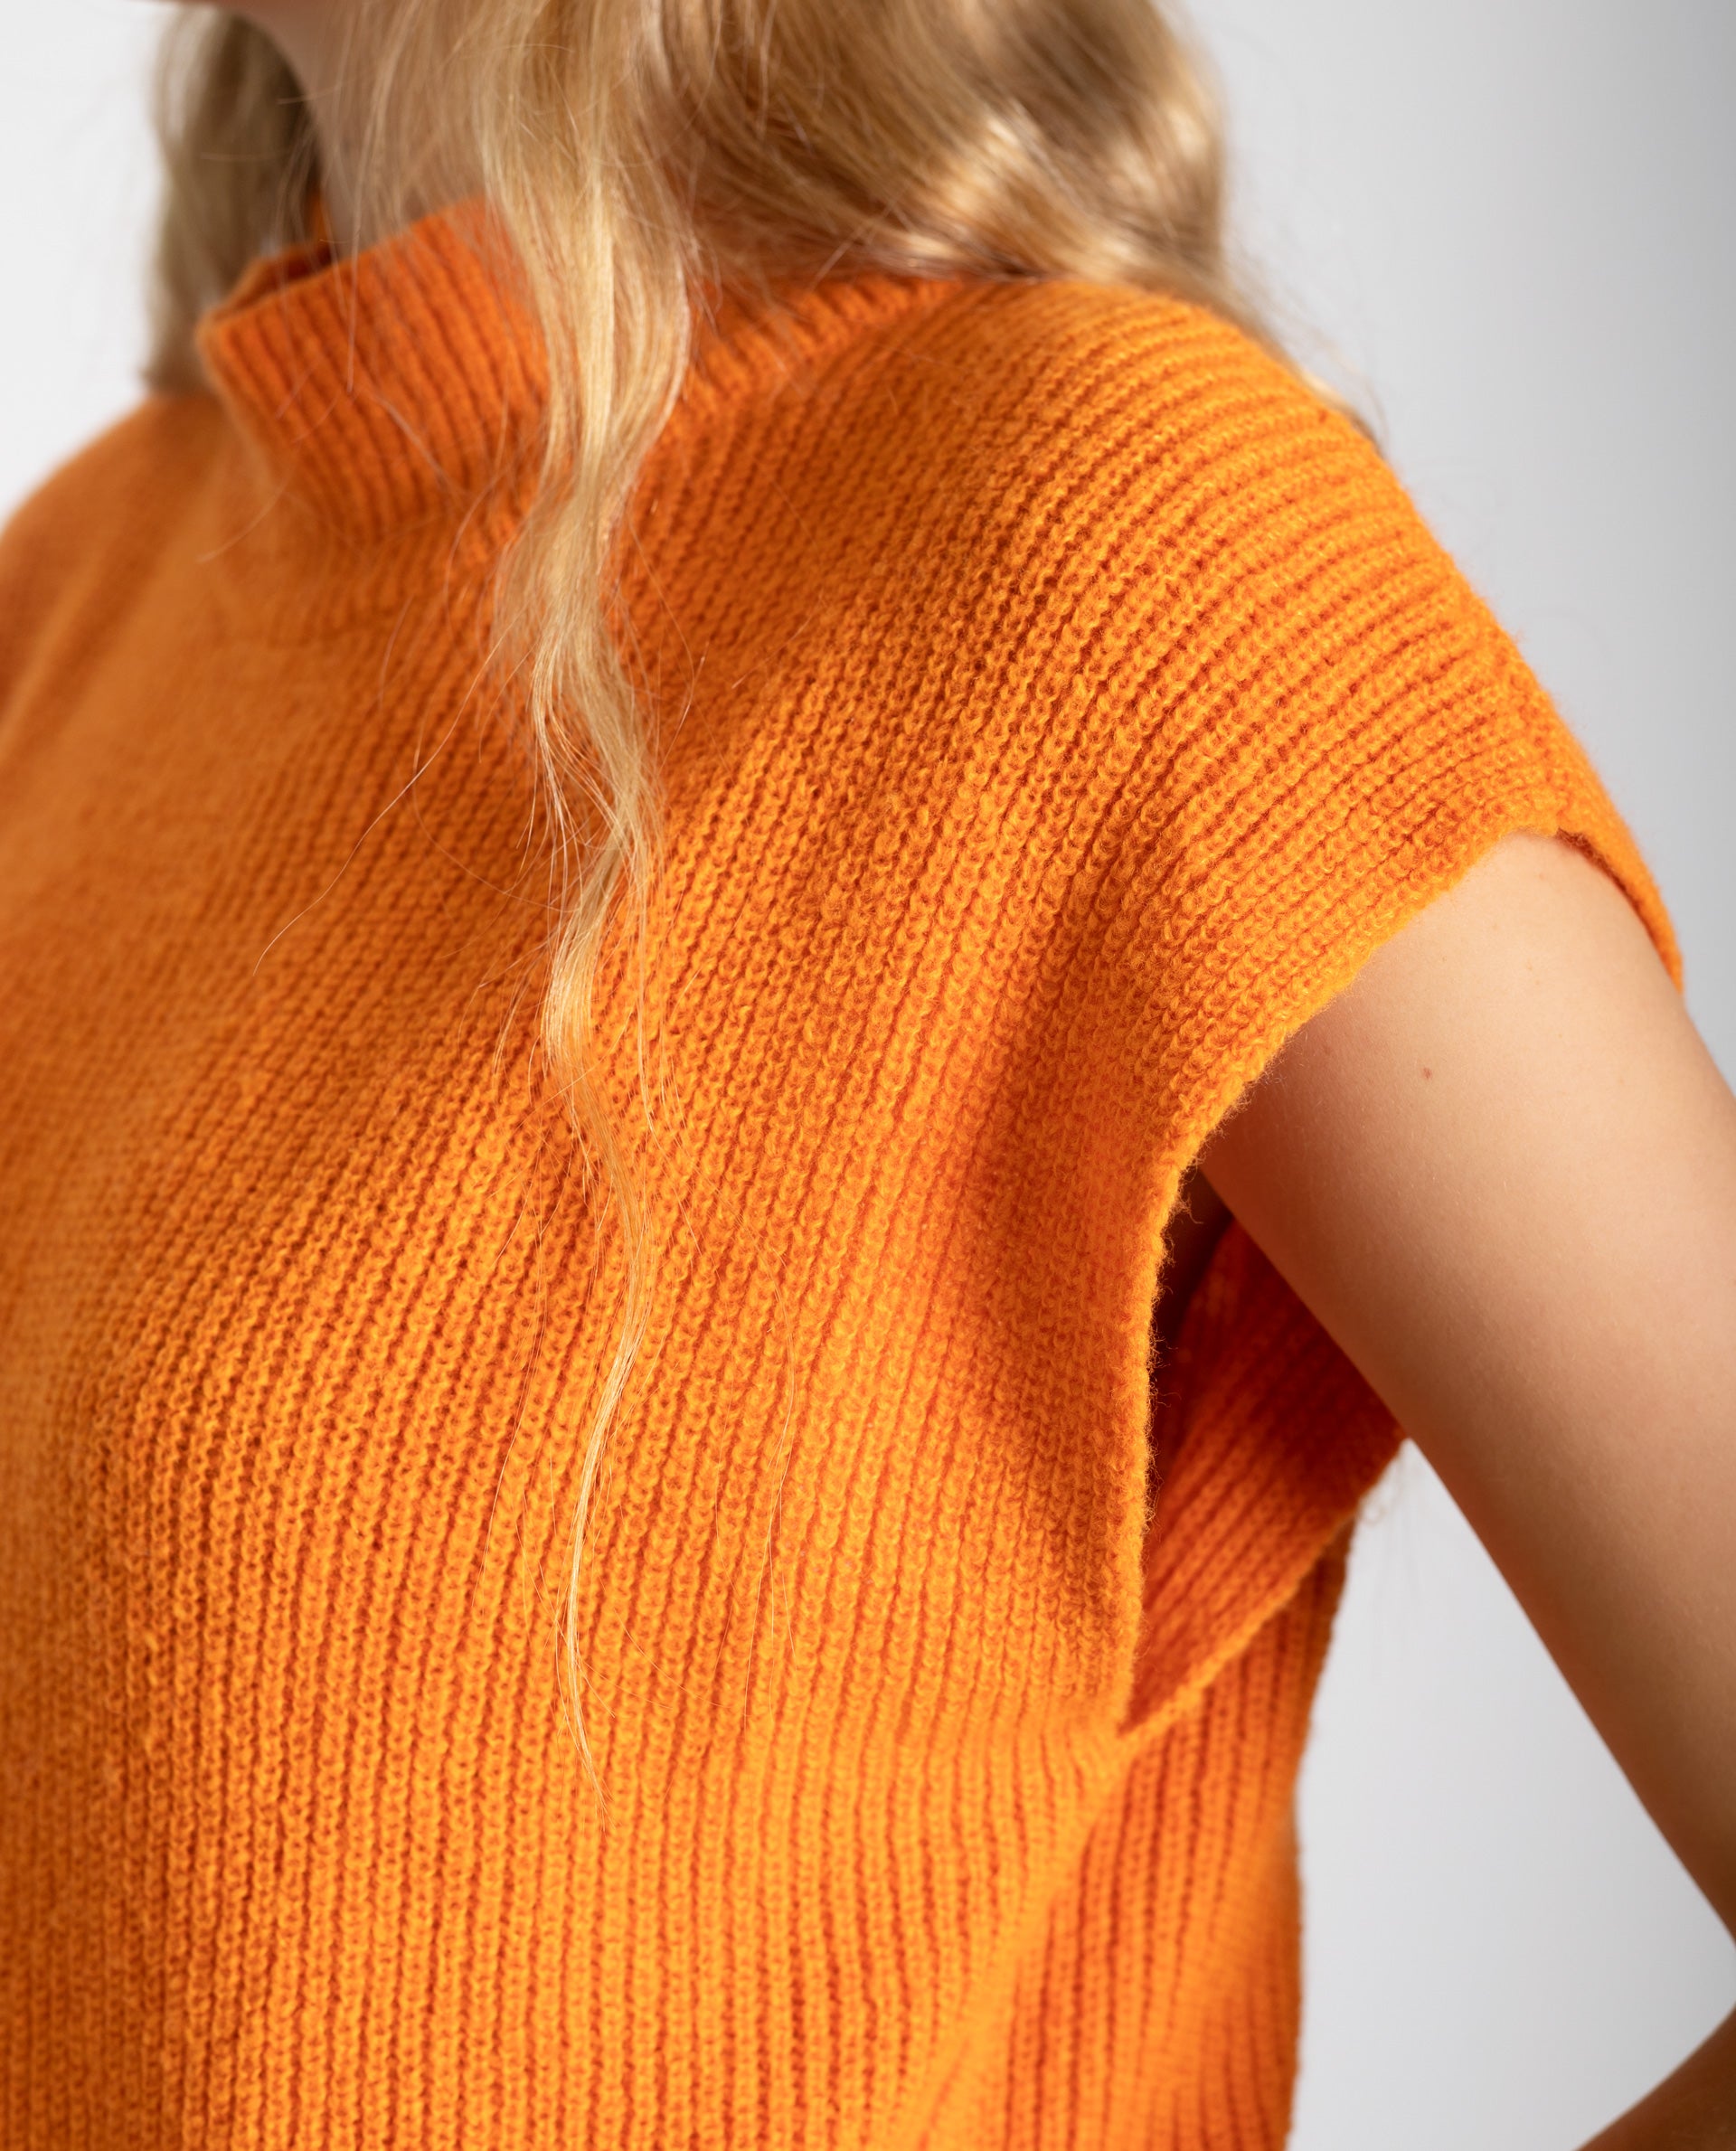 Orange Women's Knitted Vest with Stand-up Collar